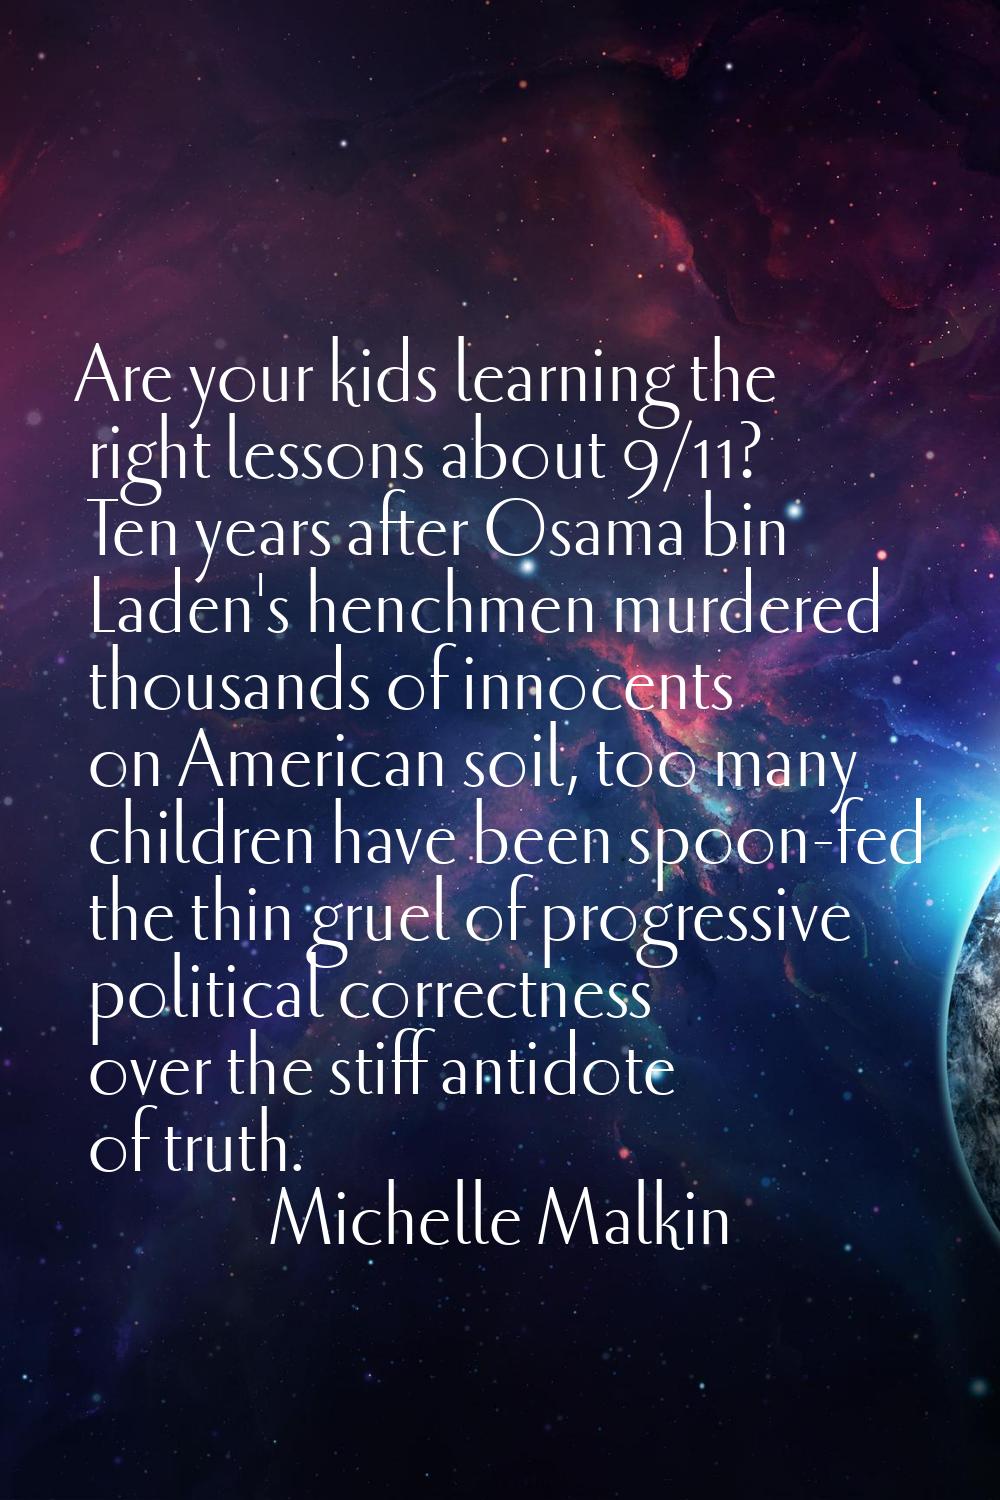 Are your kids learning the right lessons about 9/11? Ten years after Osama bin Laden's henchmen mur